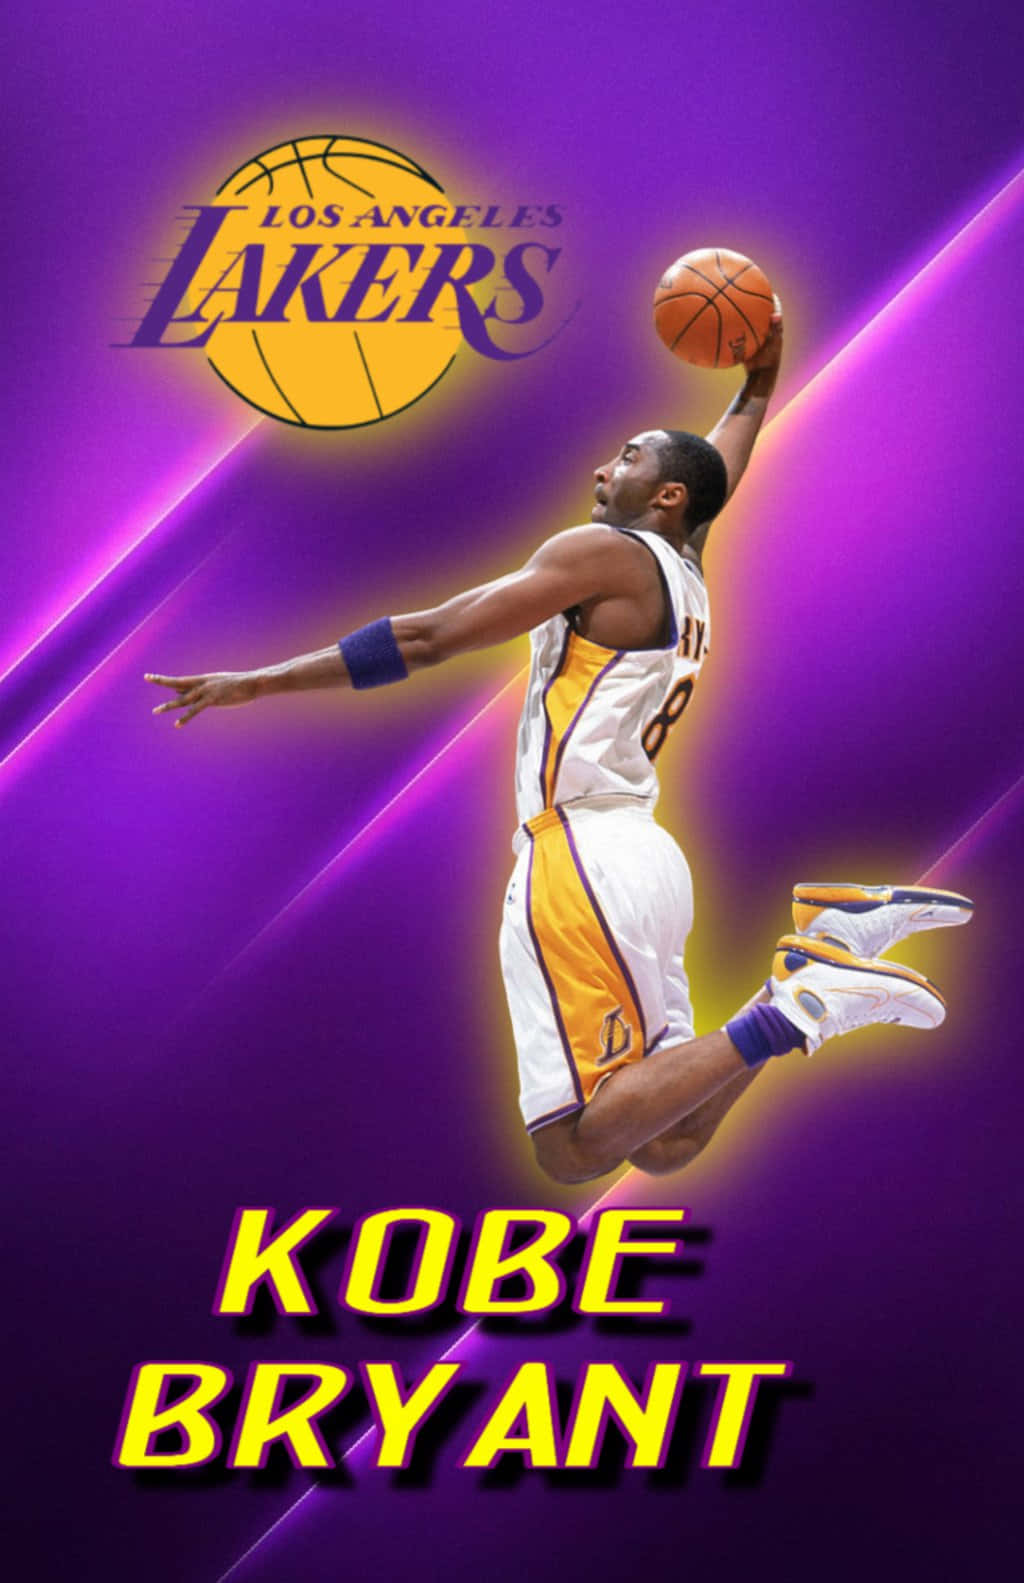 Show your Lakers pride with the Kobe Bryant Special Edition Phone Wallpaper